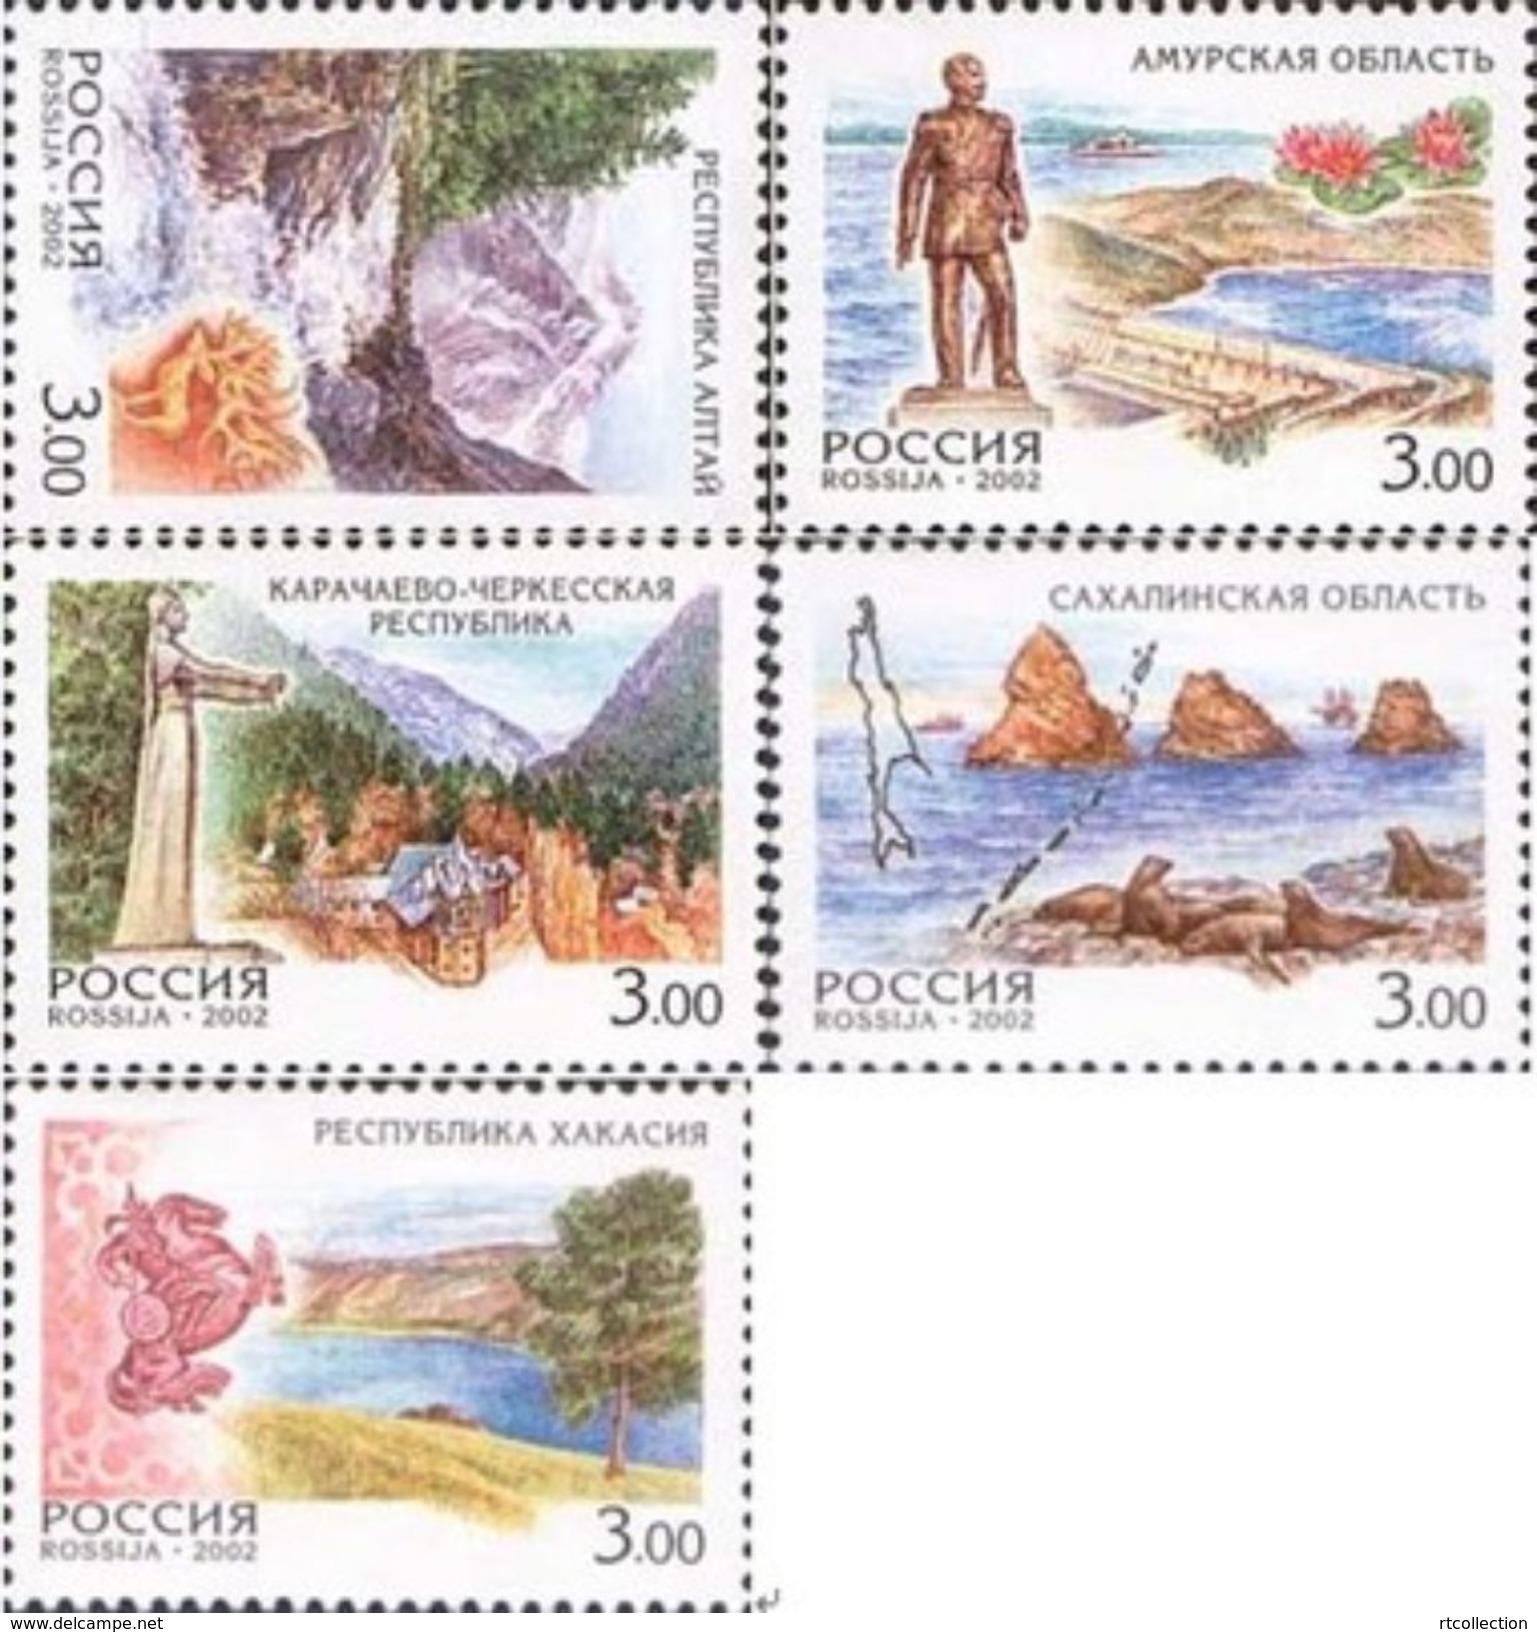 Russia 2002 Russian Regions Landscape Geography Places Architecture Art Monuments Nature Stamps MNH Michel 951-955 - Monuments